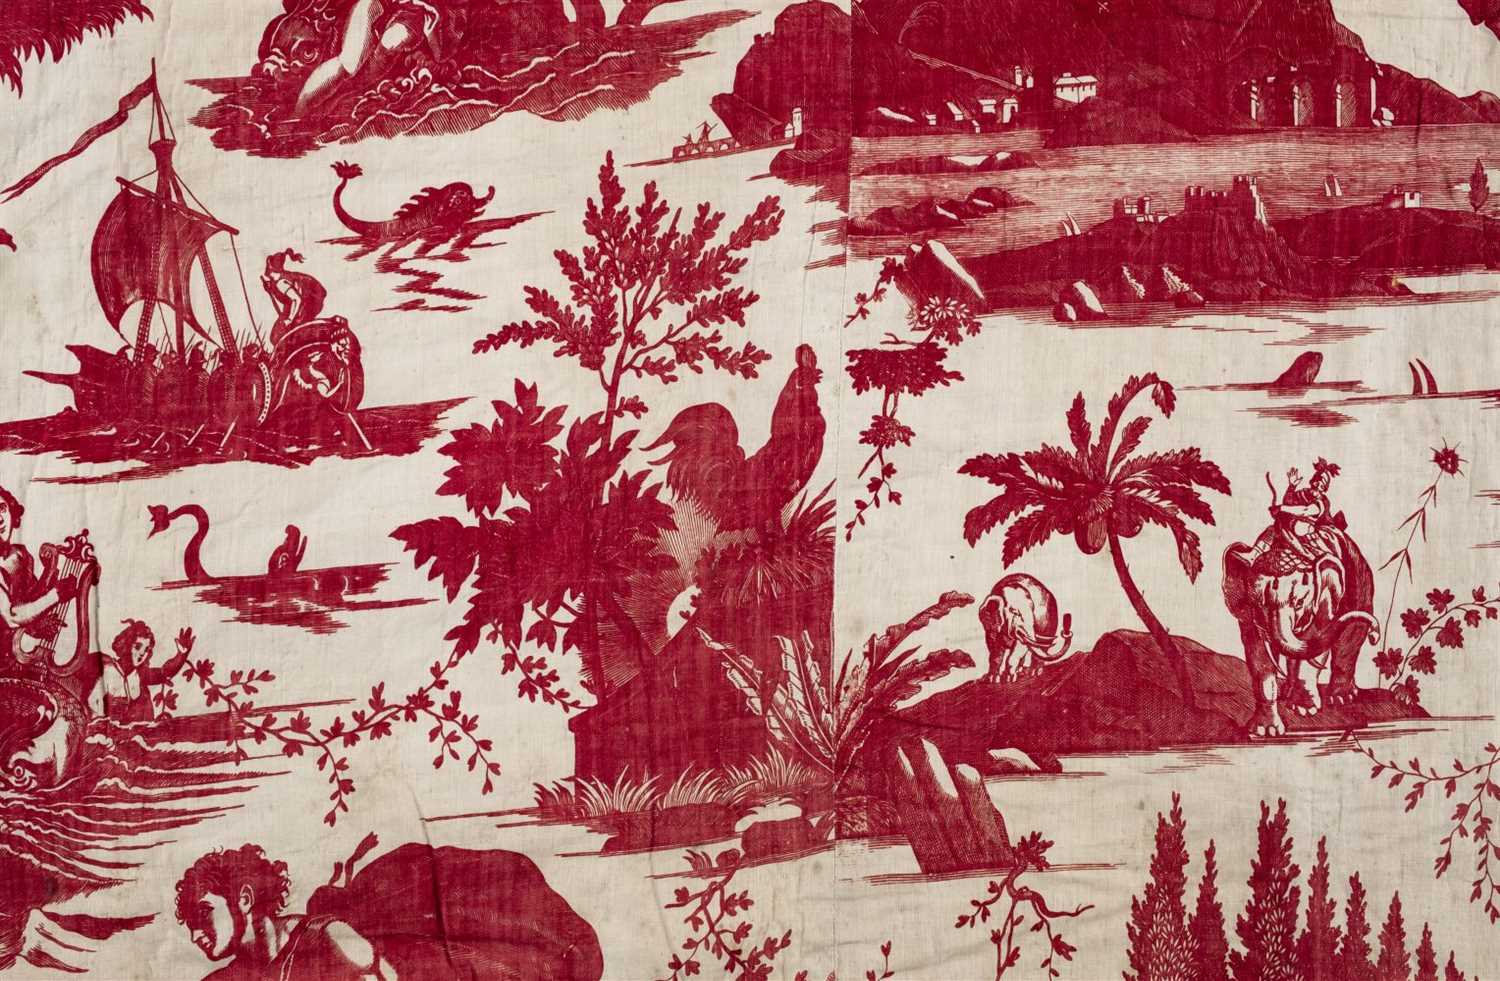 Lot 199 - Toiles de Jouy. A collection of fabric samples, late 18th century and later